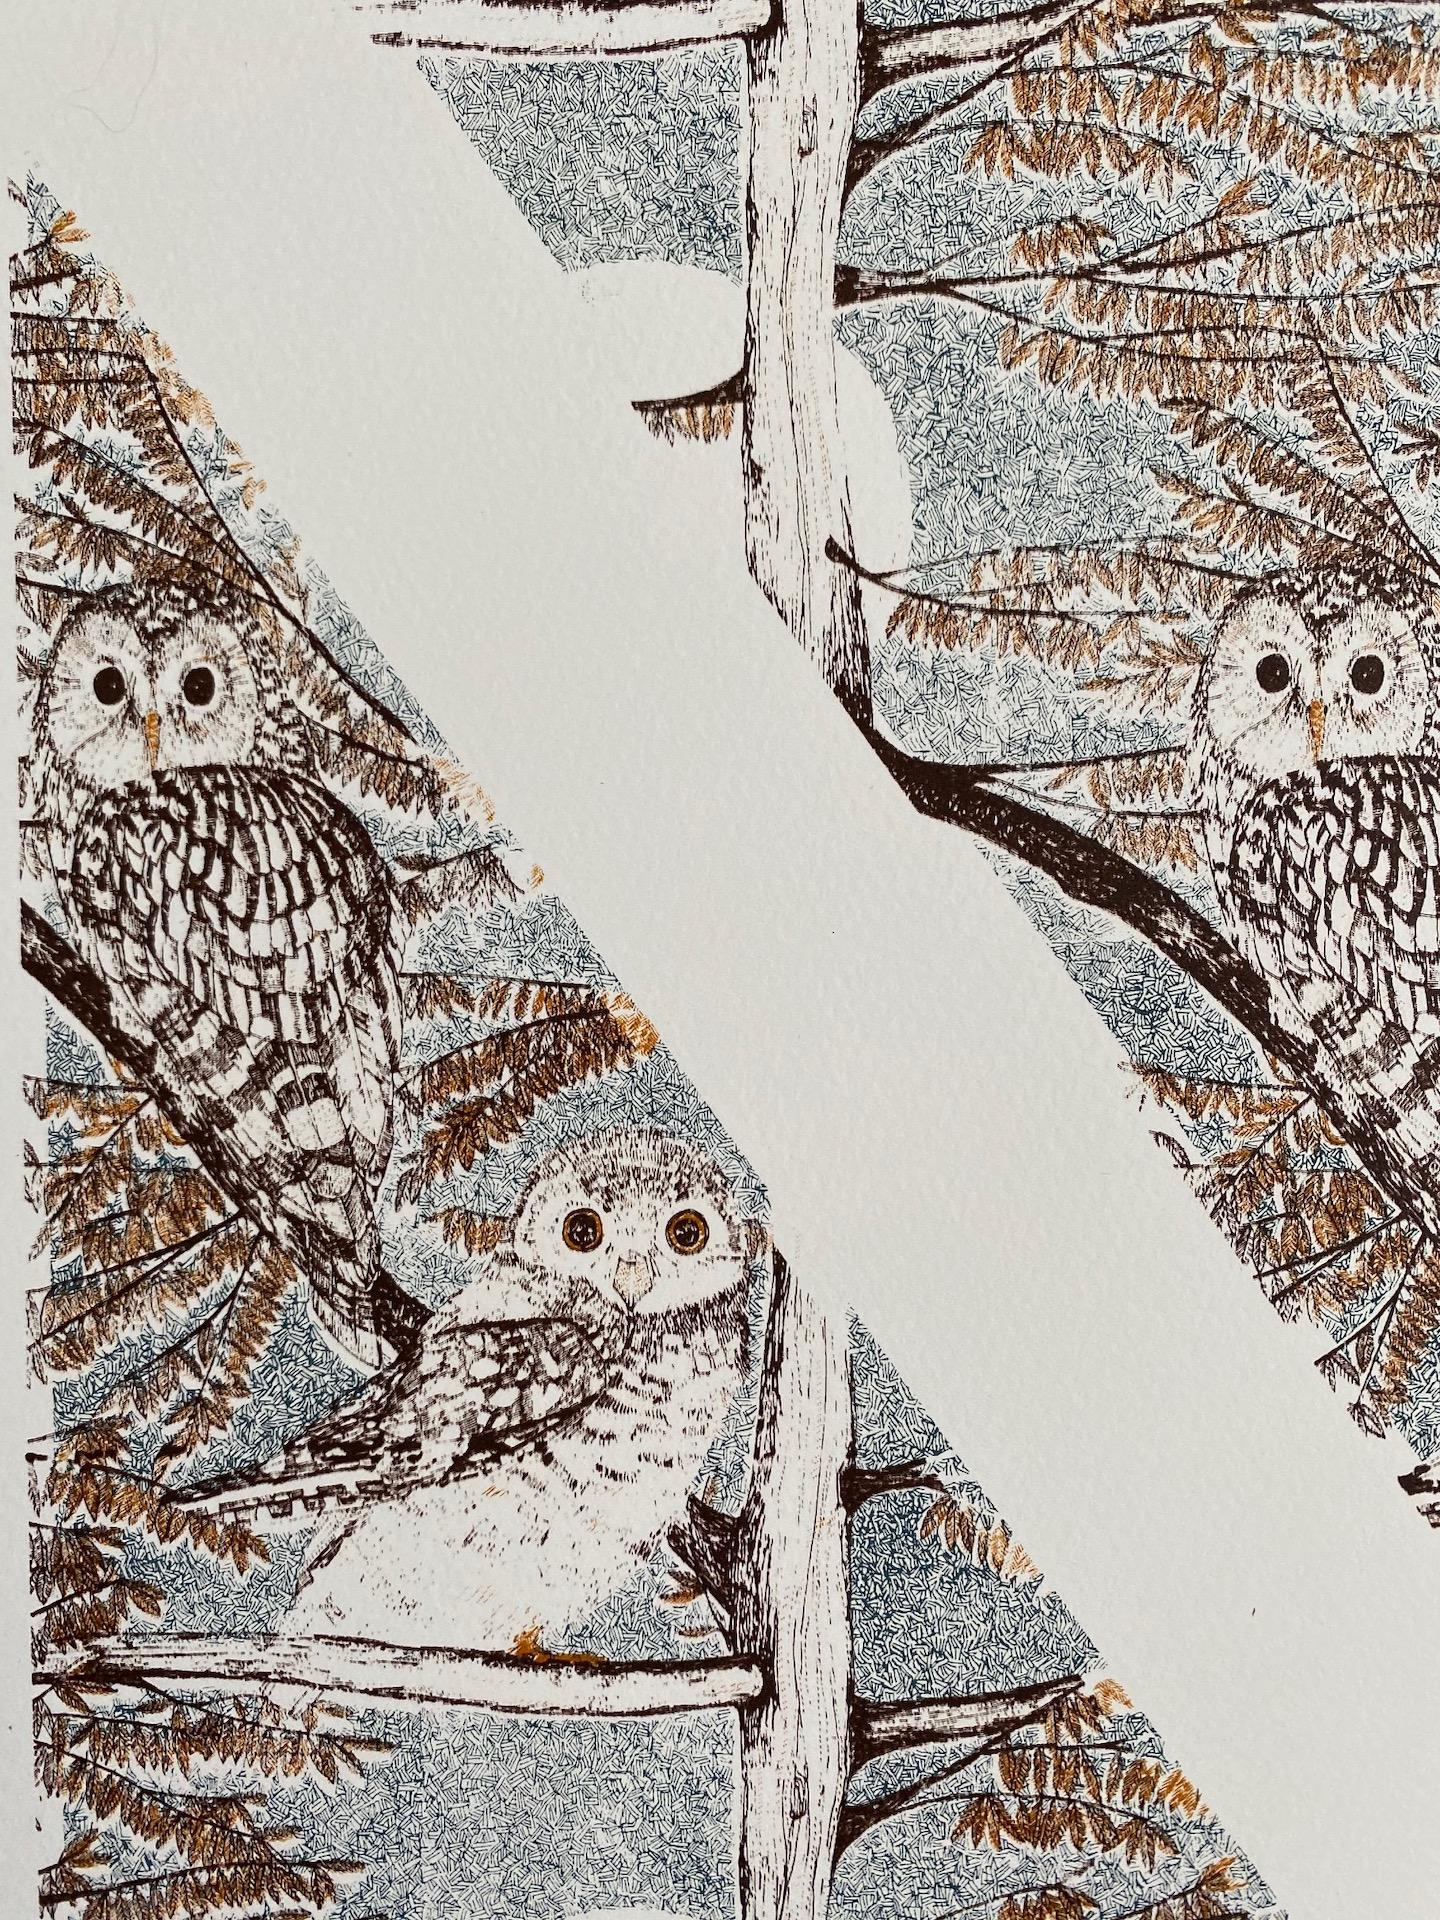 Clare Halifax, N is for Nightowl, Affordable Contemporary Art, Animal Art 5